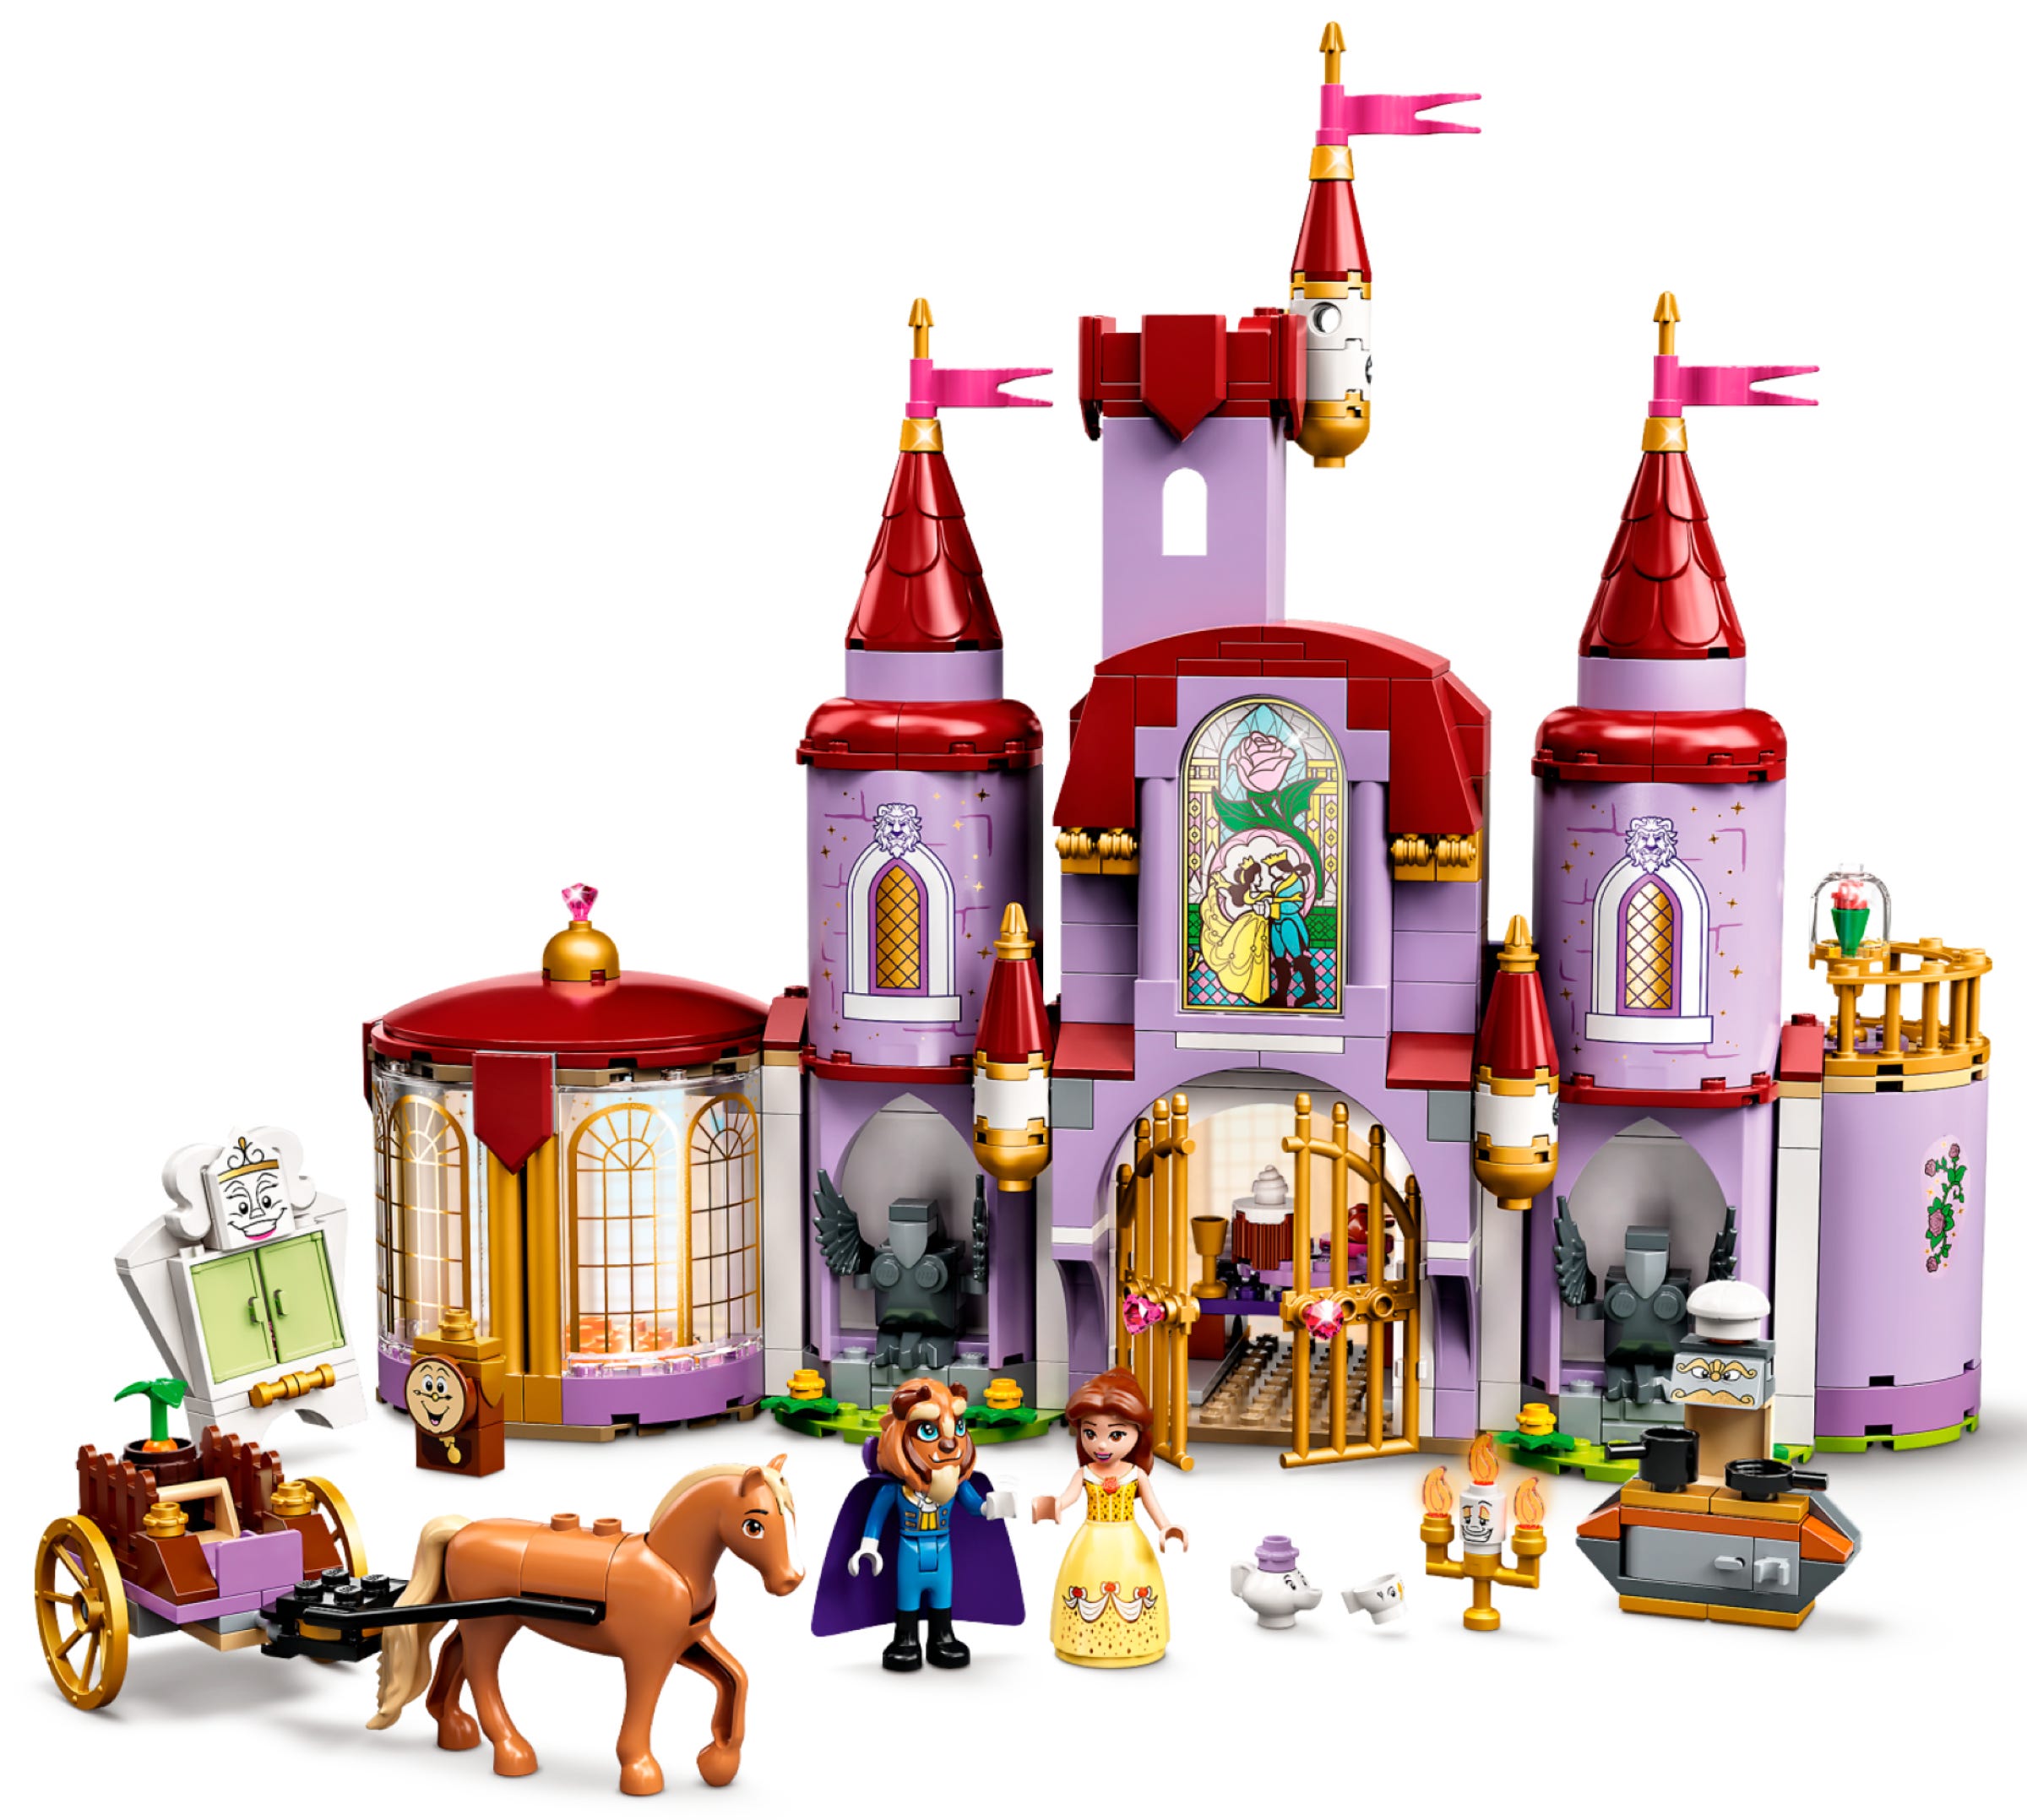 Belle and the Beast s Castle